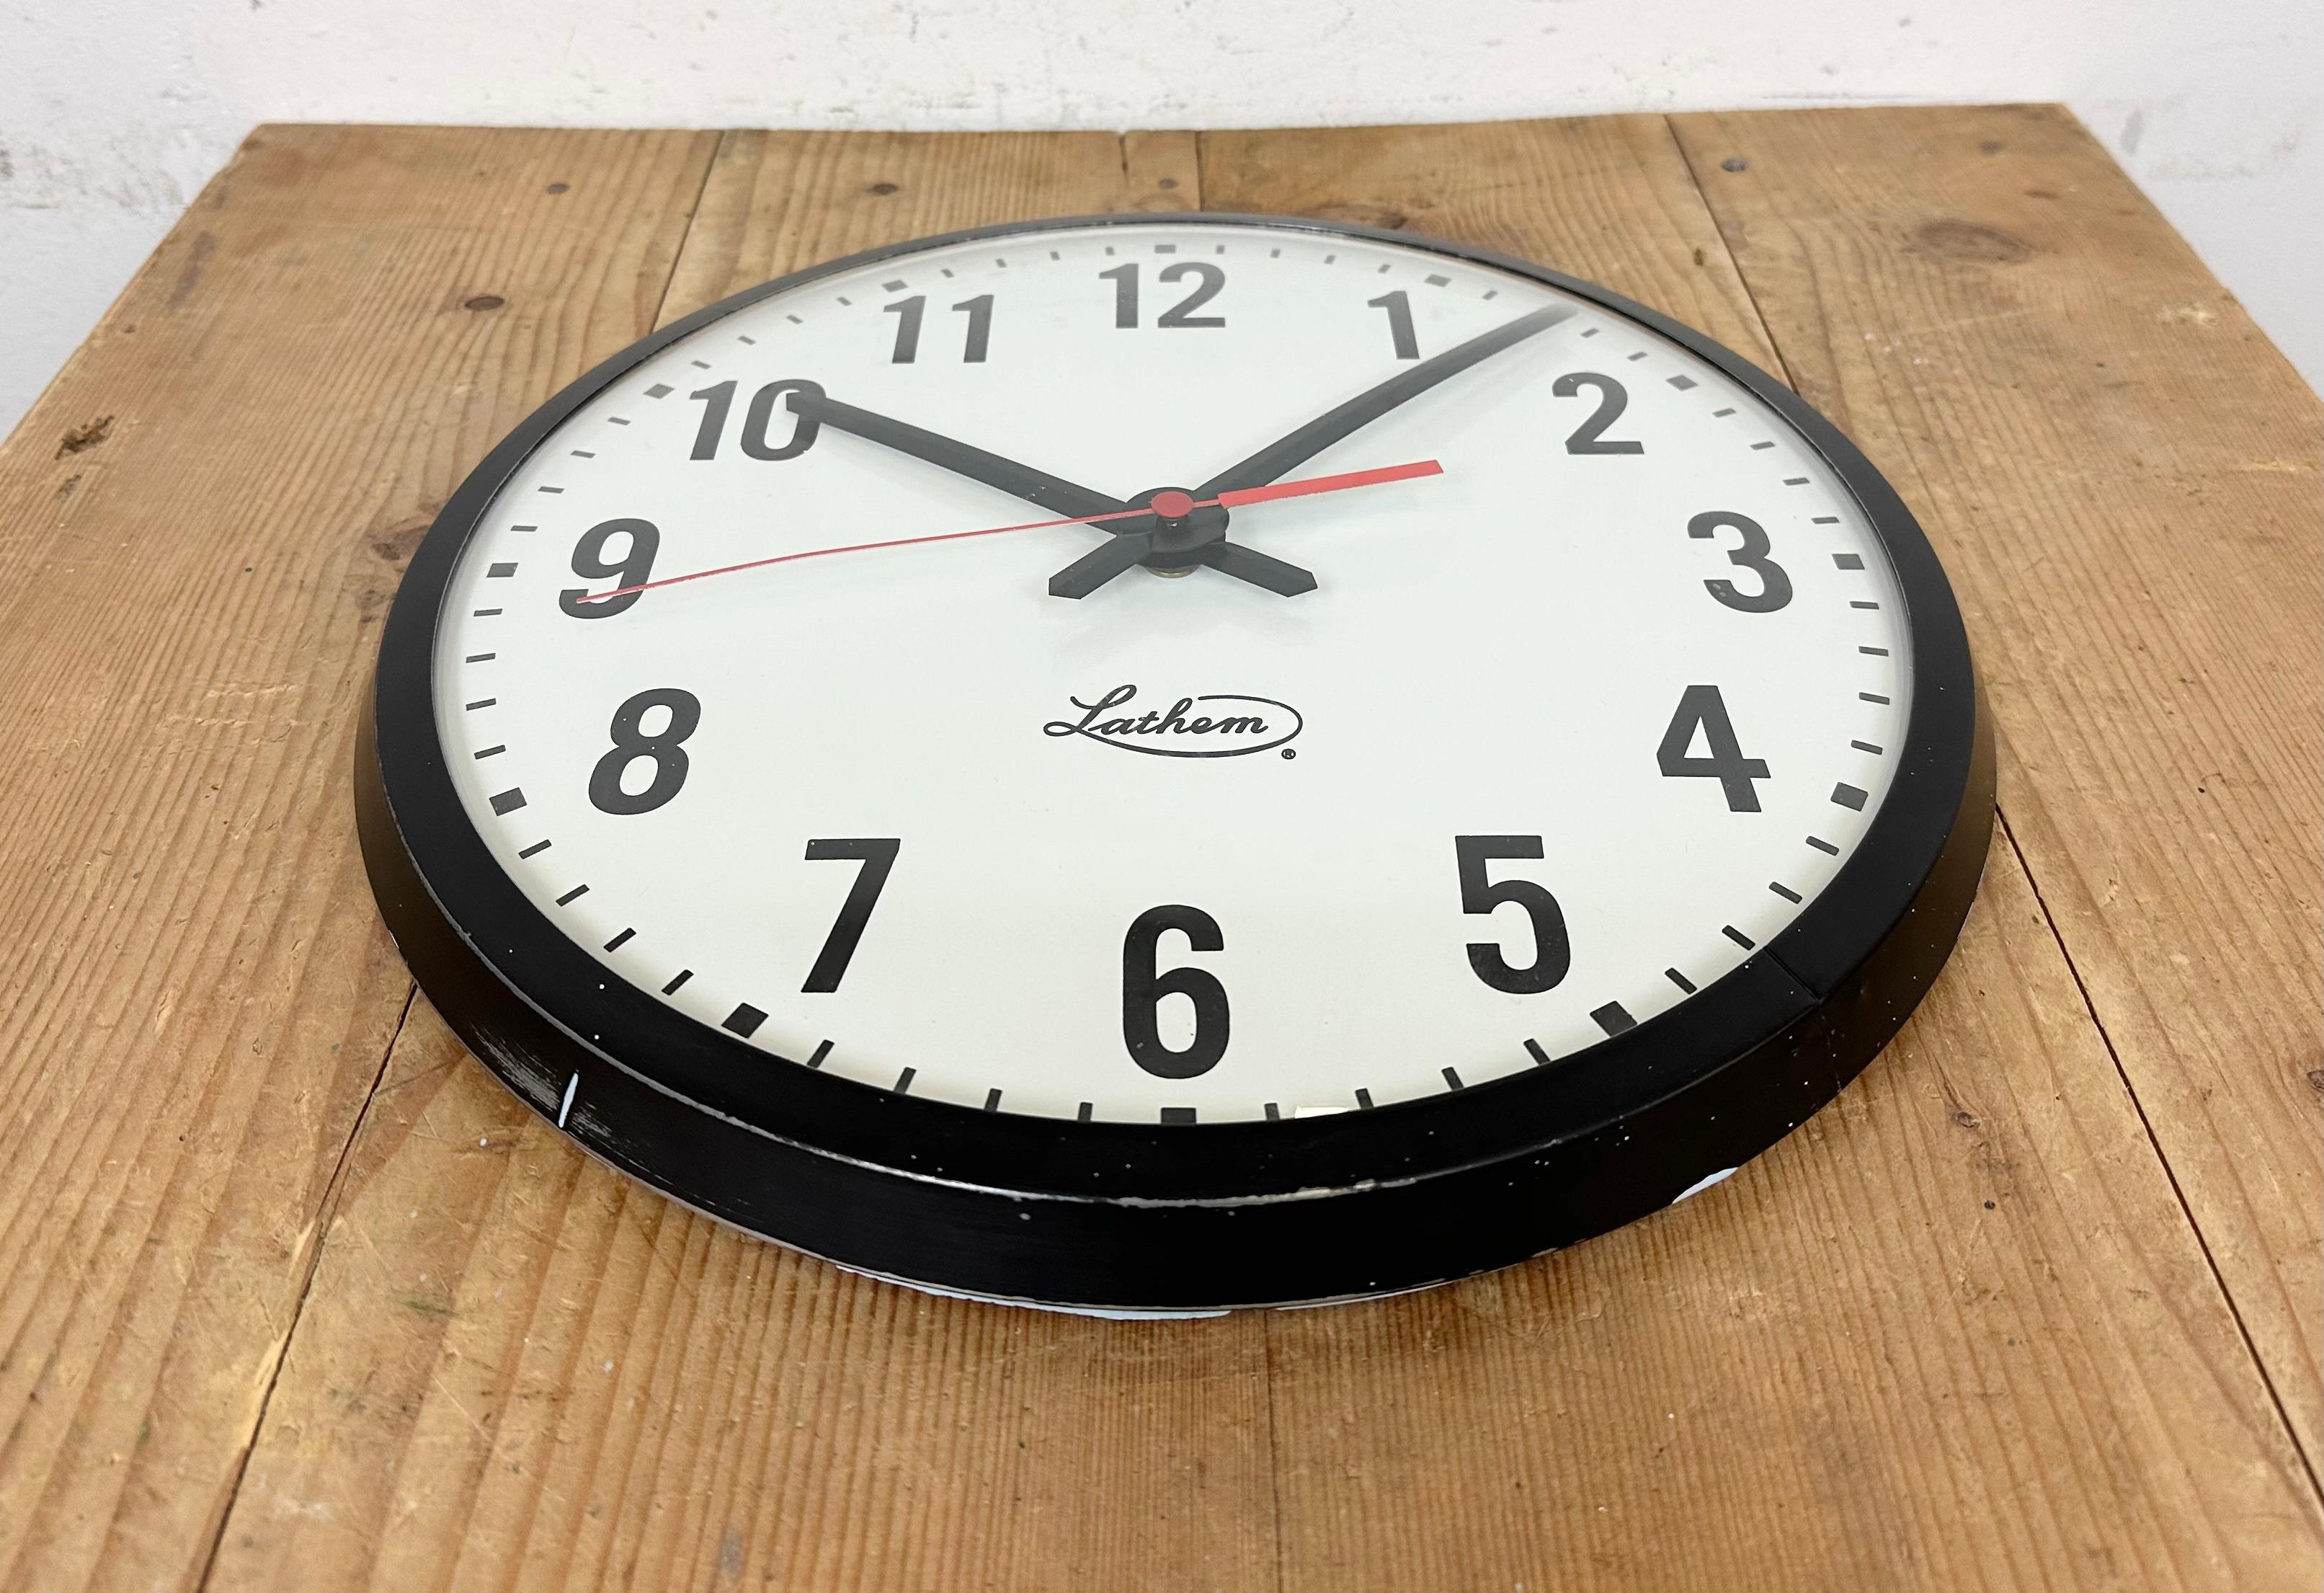 Glass Vintage Black School Wall Clock from Lathem, 1980s For Sale